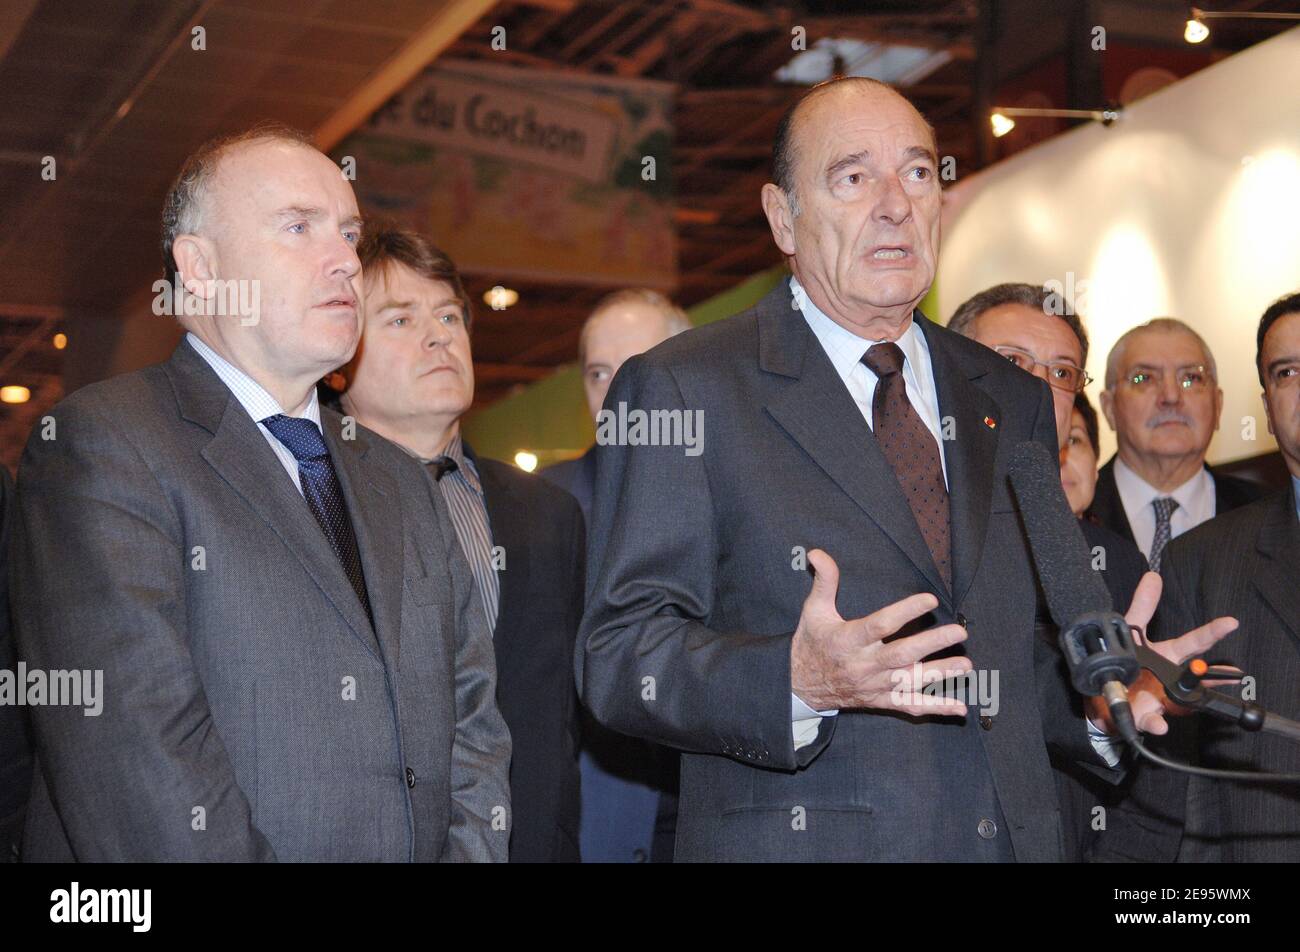 French President Jacques Chirac make his speech about the arrival in France of the H5N1 virus, during the official opening of the International Agricultural Show 2006 at Paris-Expo Porte de Versailles, on February 25, 2006. Photo by Christophe Guibbaud/ABACAPRESS.COM Stock Photo